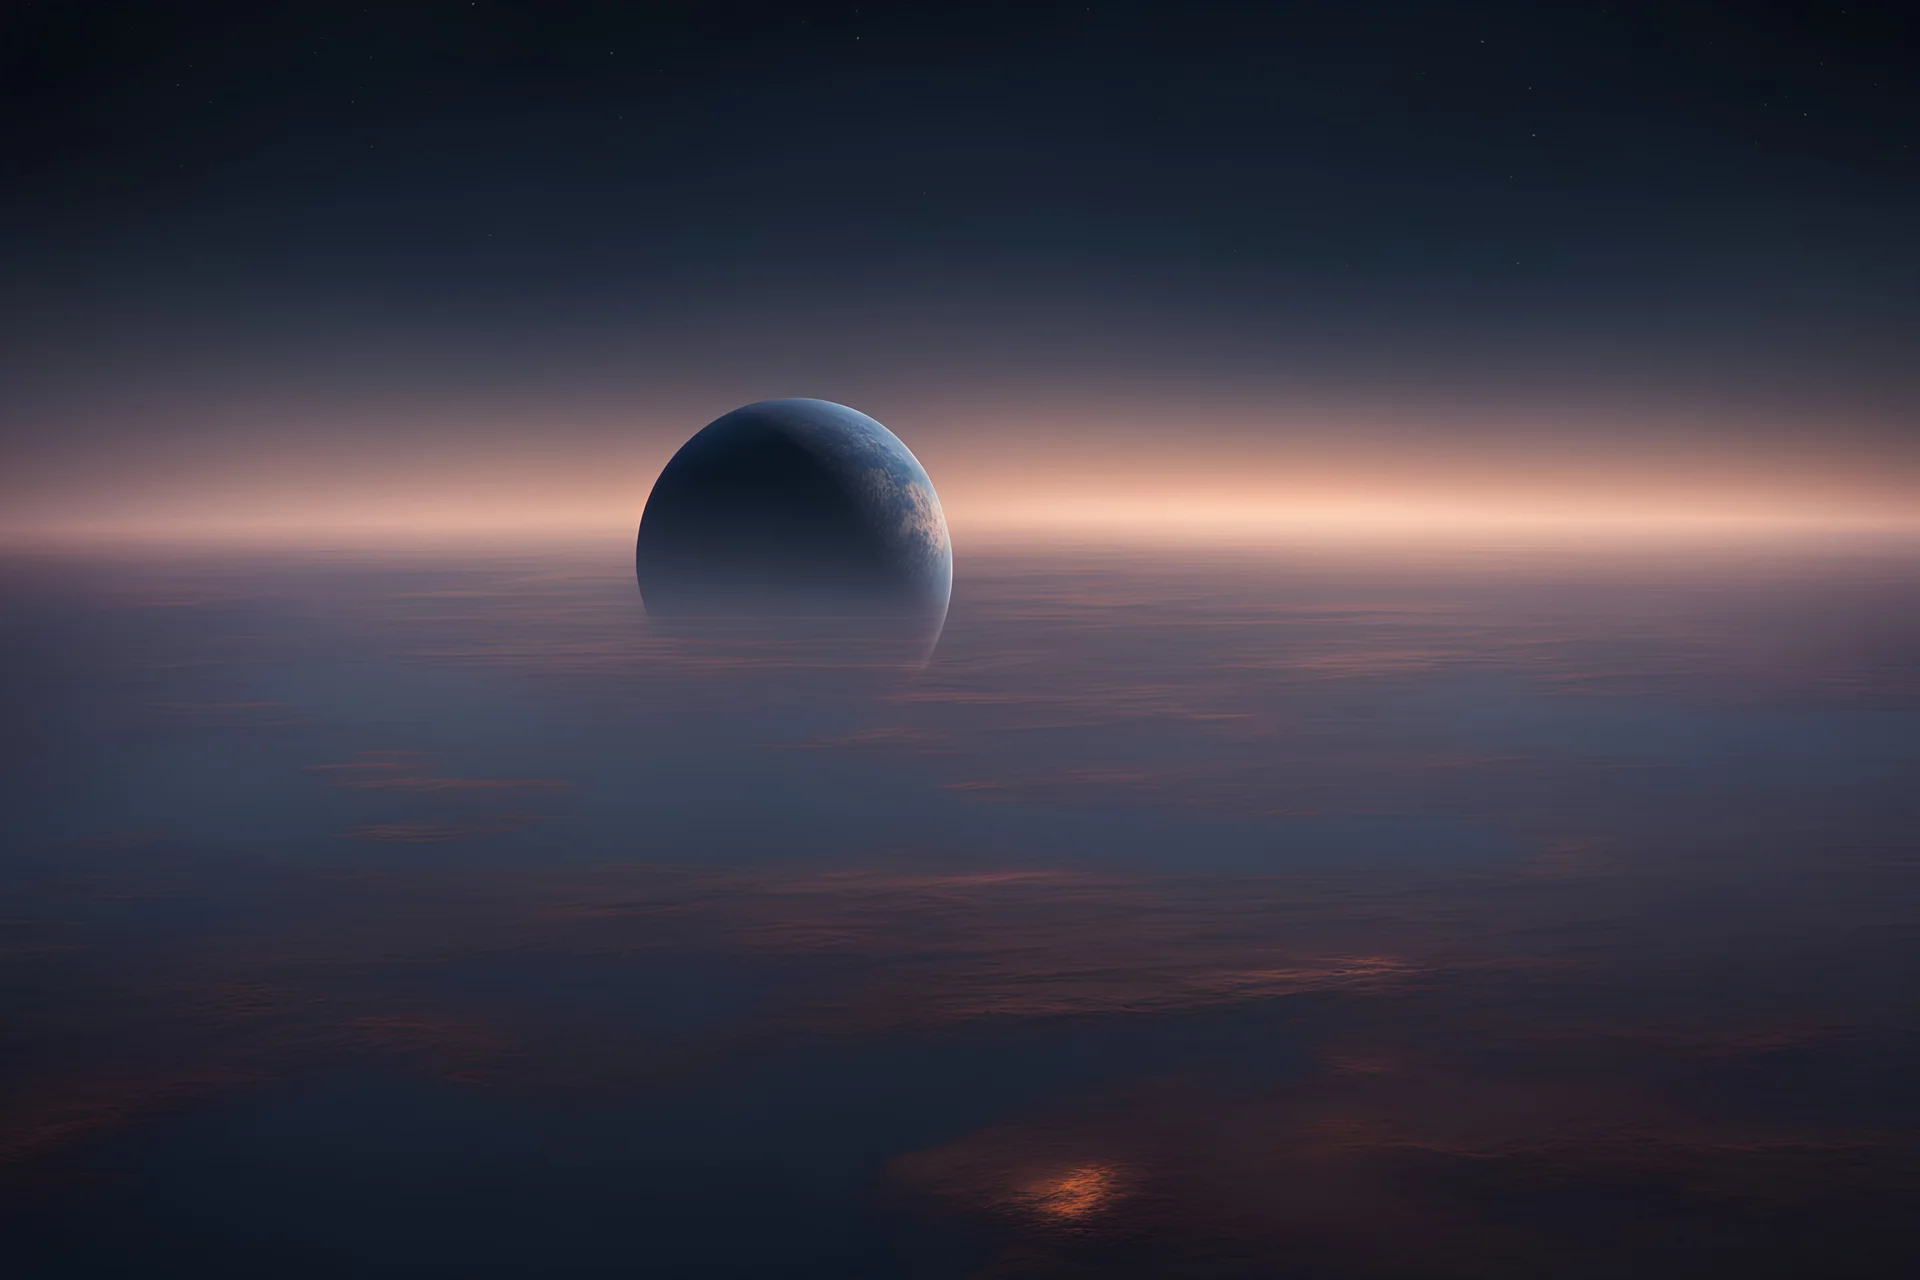 a calm image of the planet during nightfall. rmpty sky